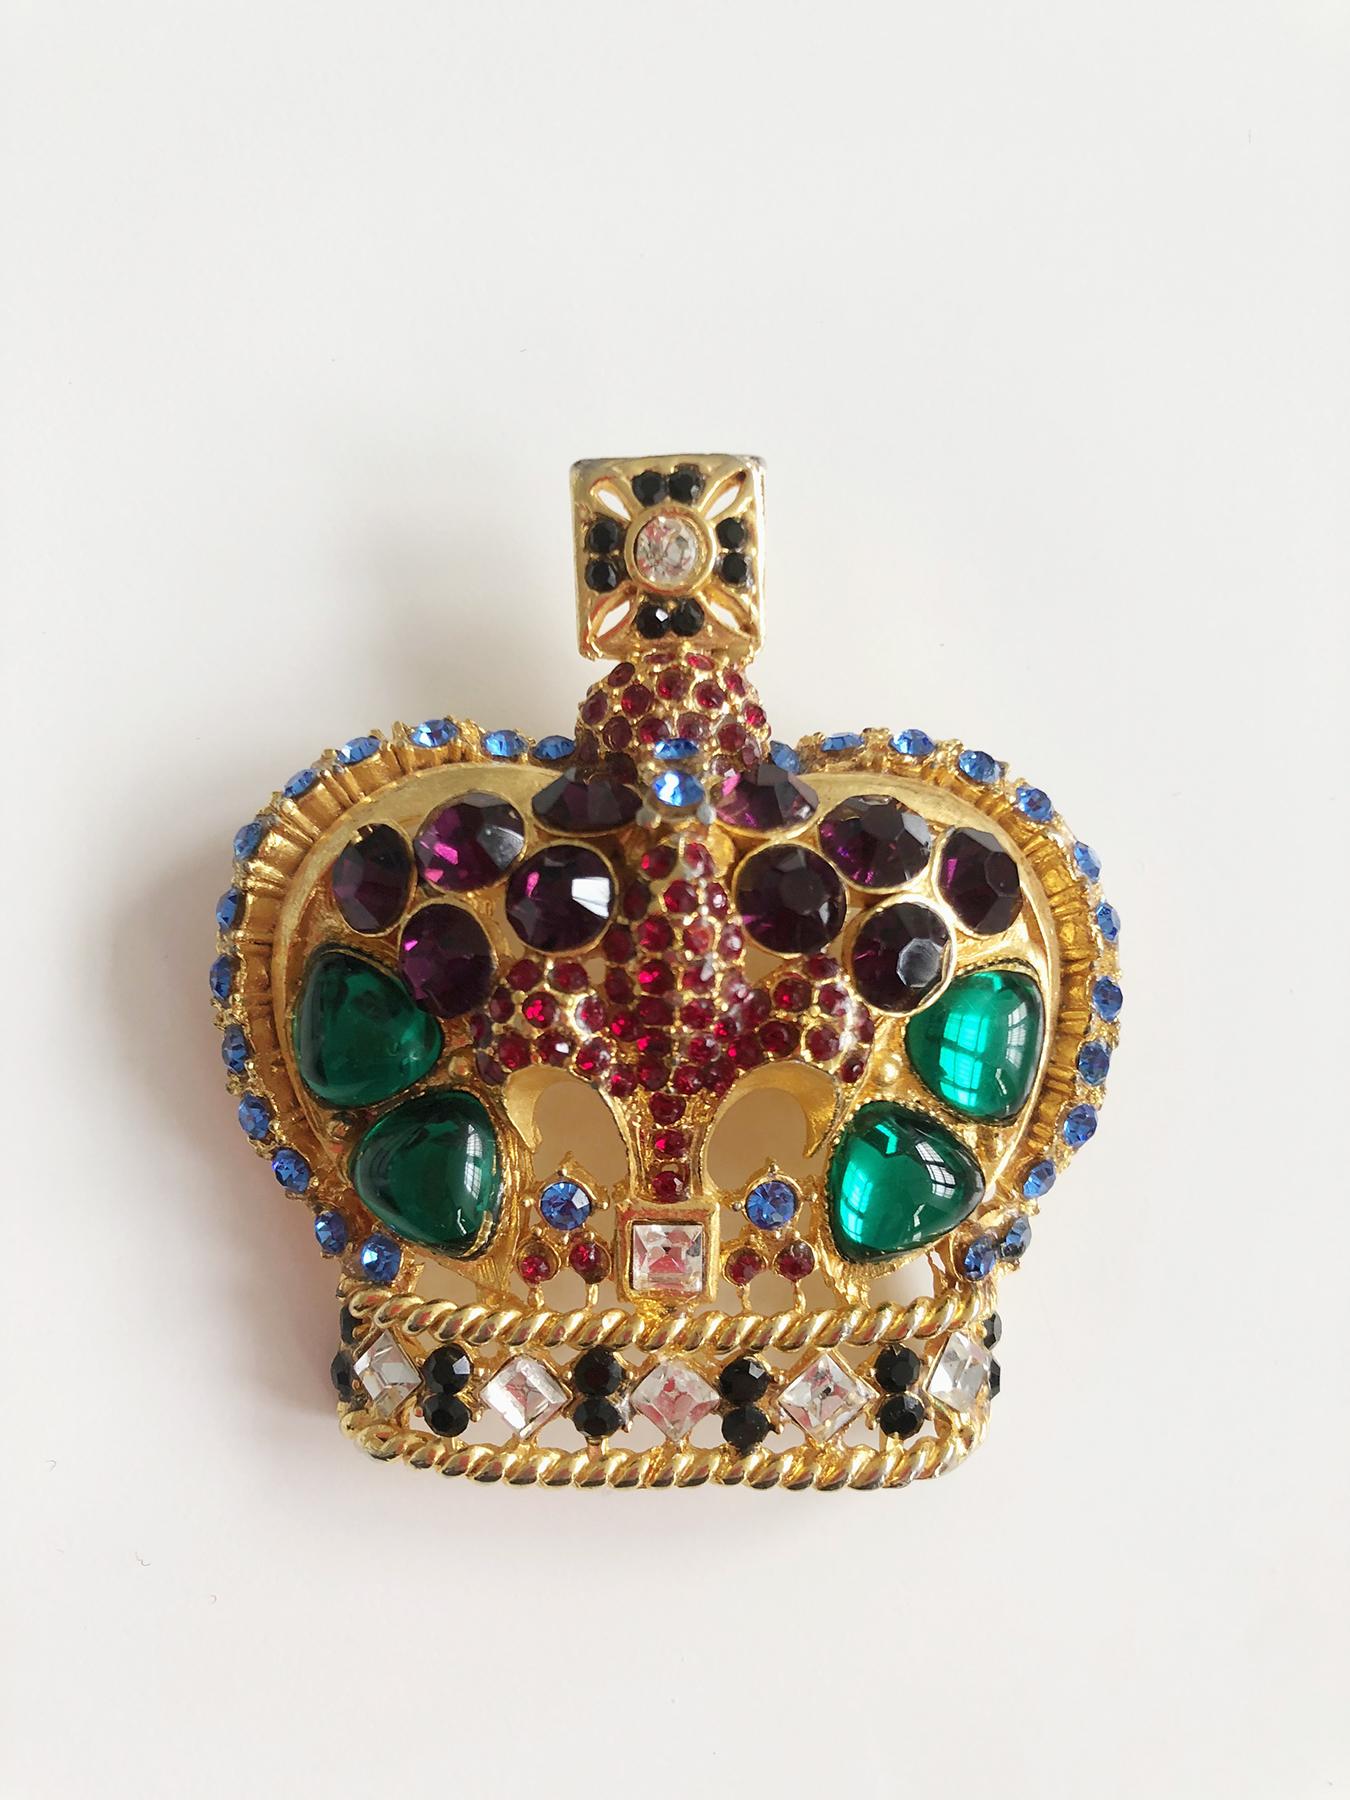 Beautiful brooch by Gianni Versace embellished with a lily and surmounted by a cross.

It is made of gilded metal with inlaid and poured crystal gems: sapphire crystals cabochon blue, green, red, purple and transparent

Very delicate work of setting